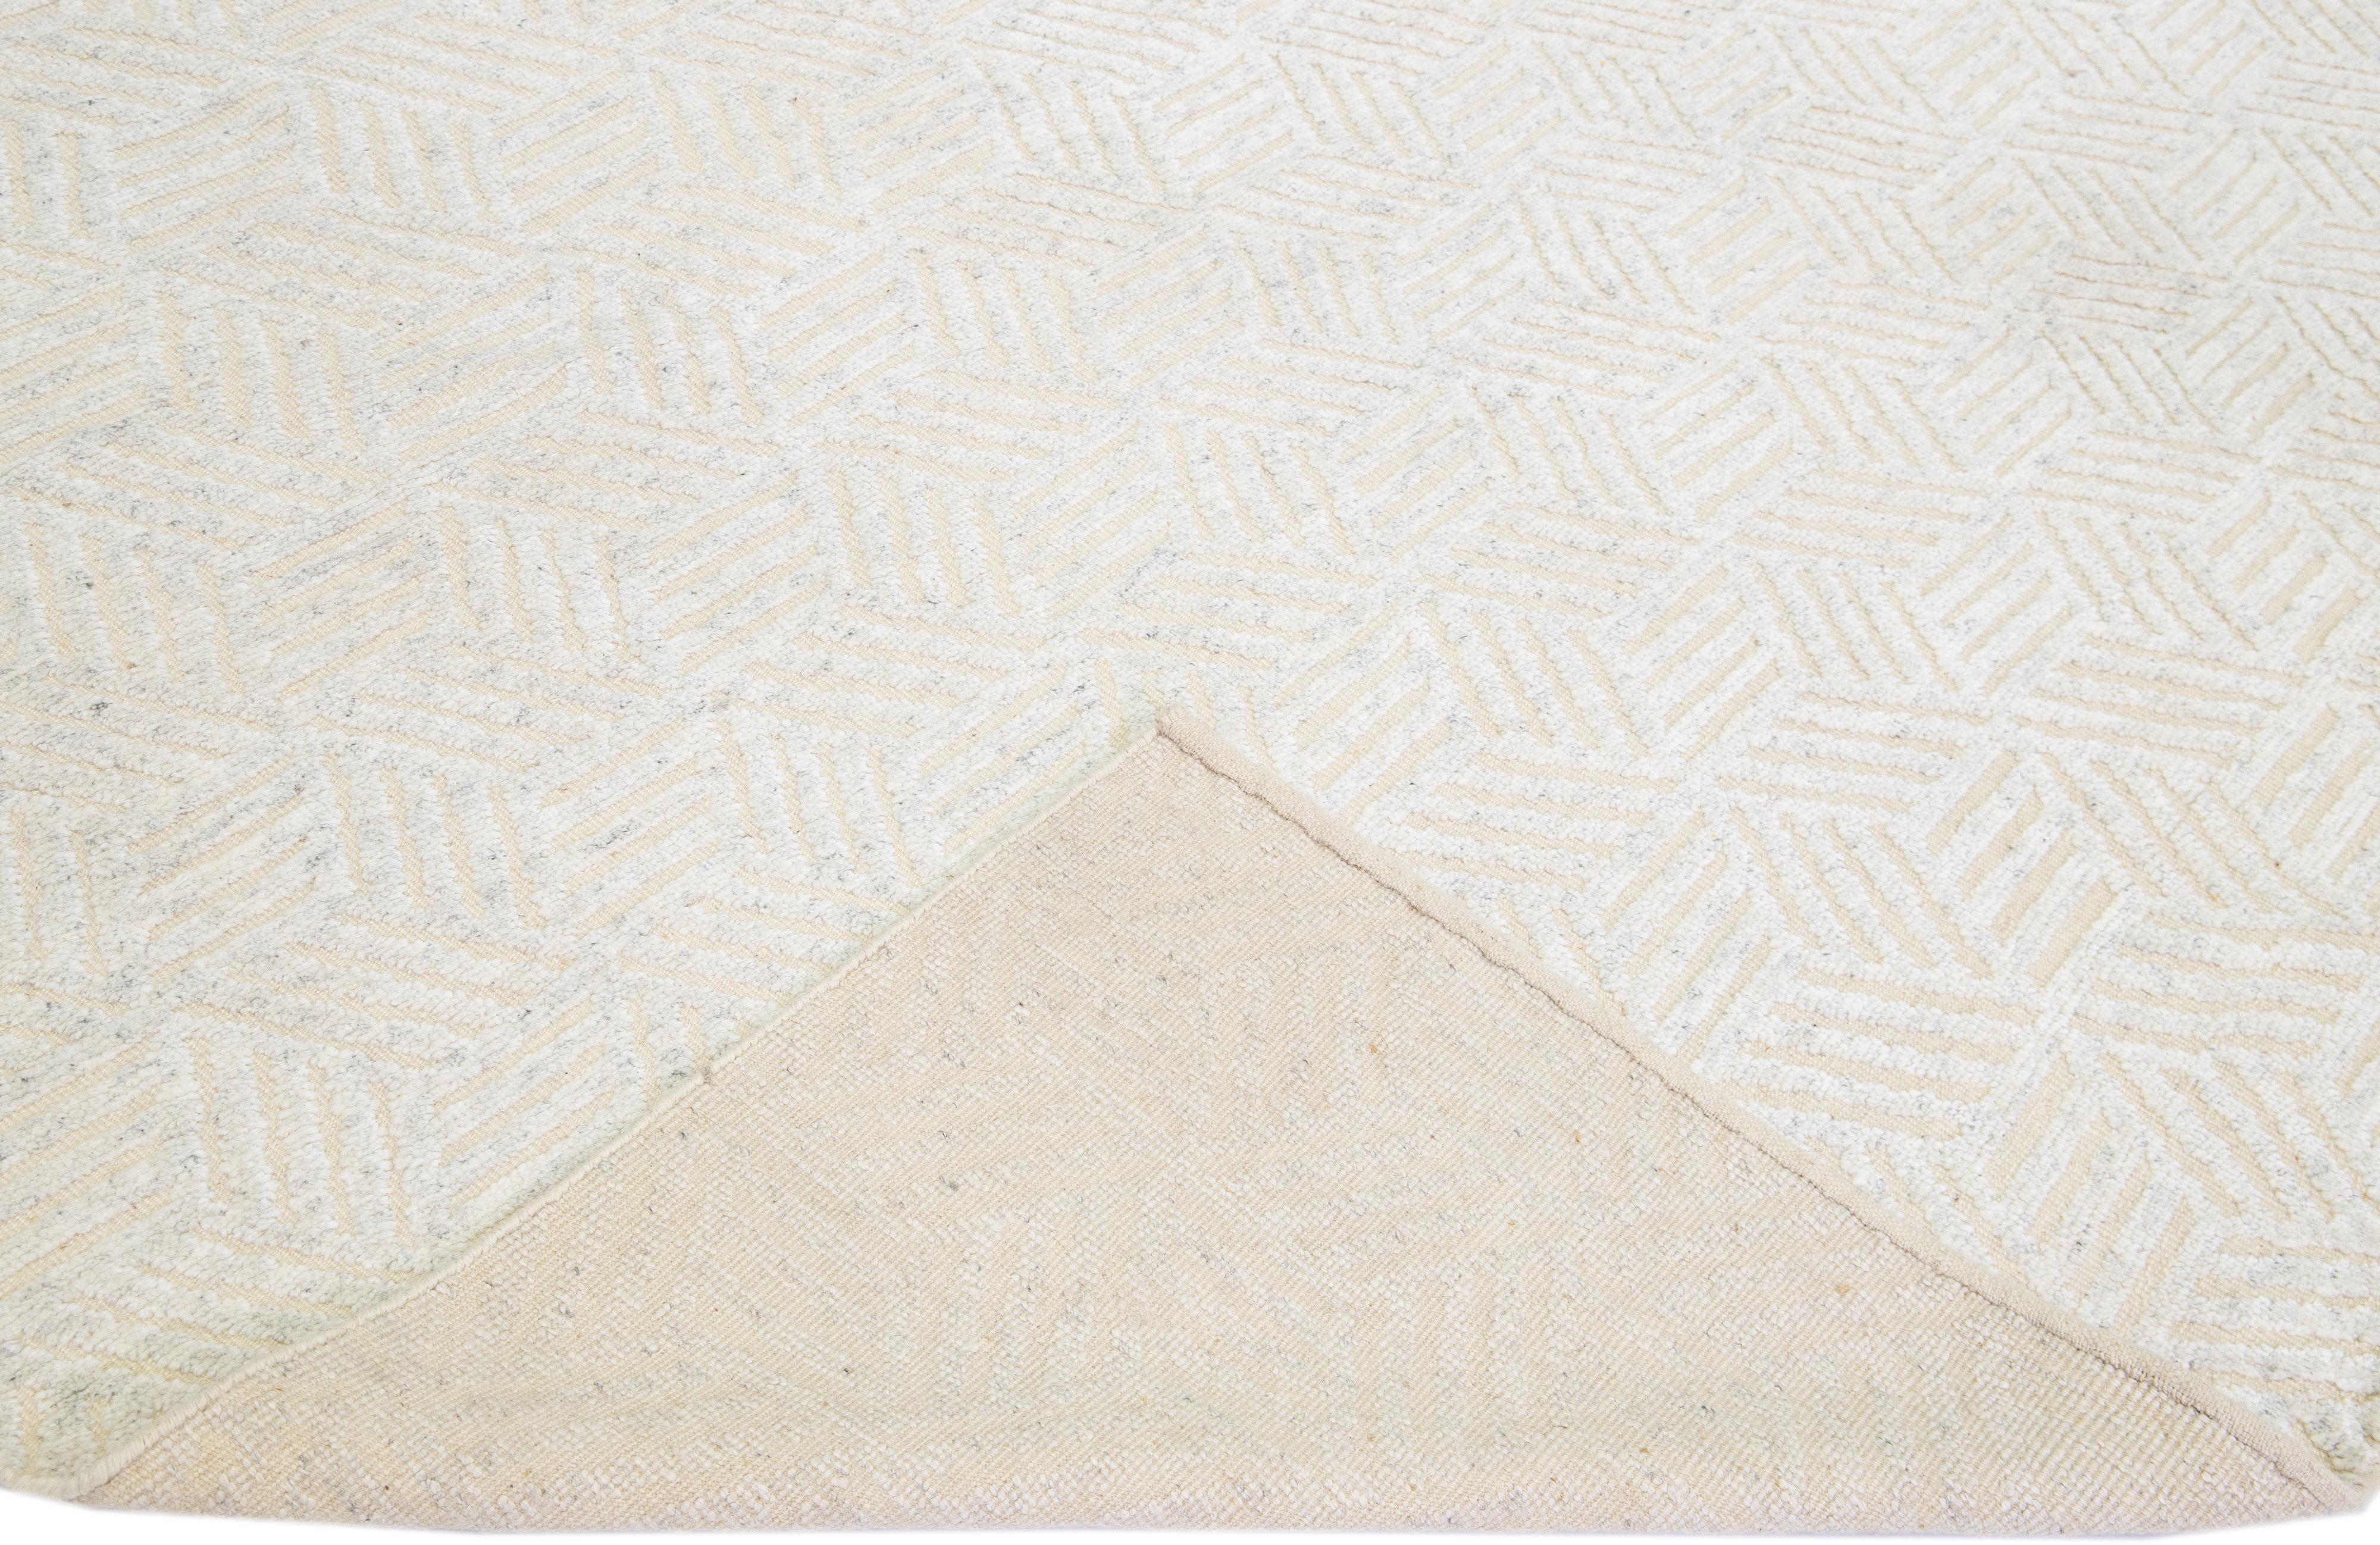 Beautiful modern Moroccan style hand-knotted wool rug with an antique white field. This piece has ivory in the all-over geometric abstract design.

This rug measures: 12'1